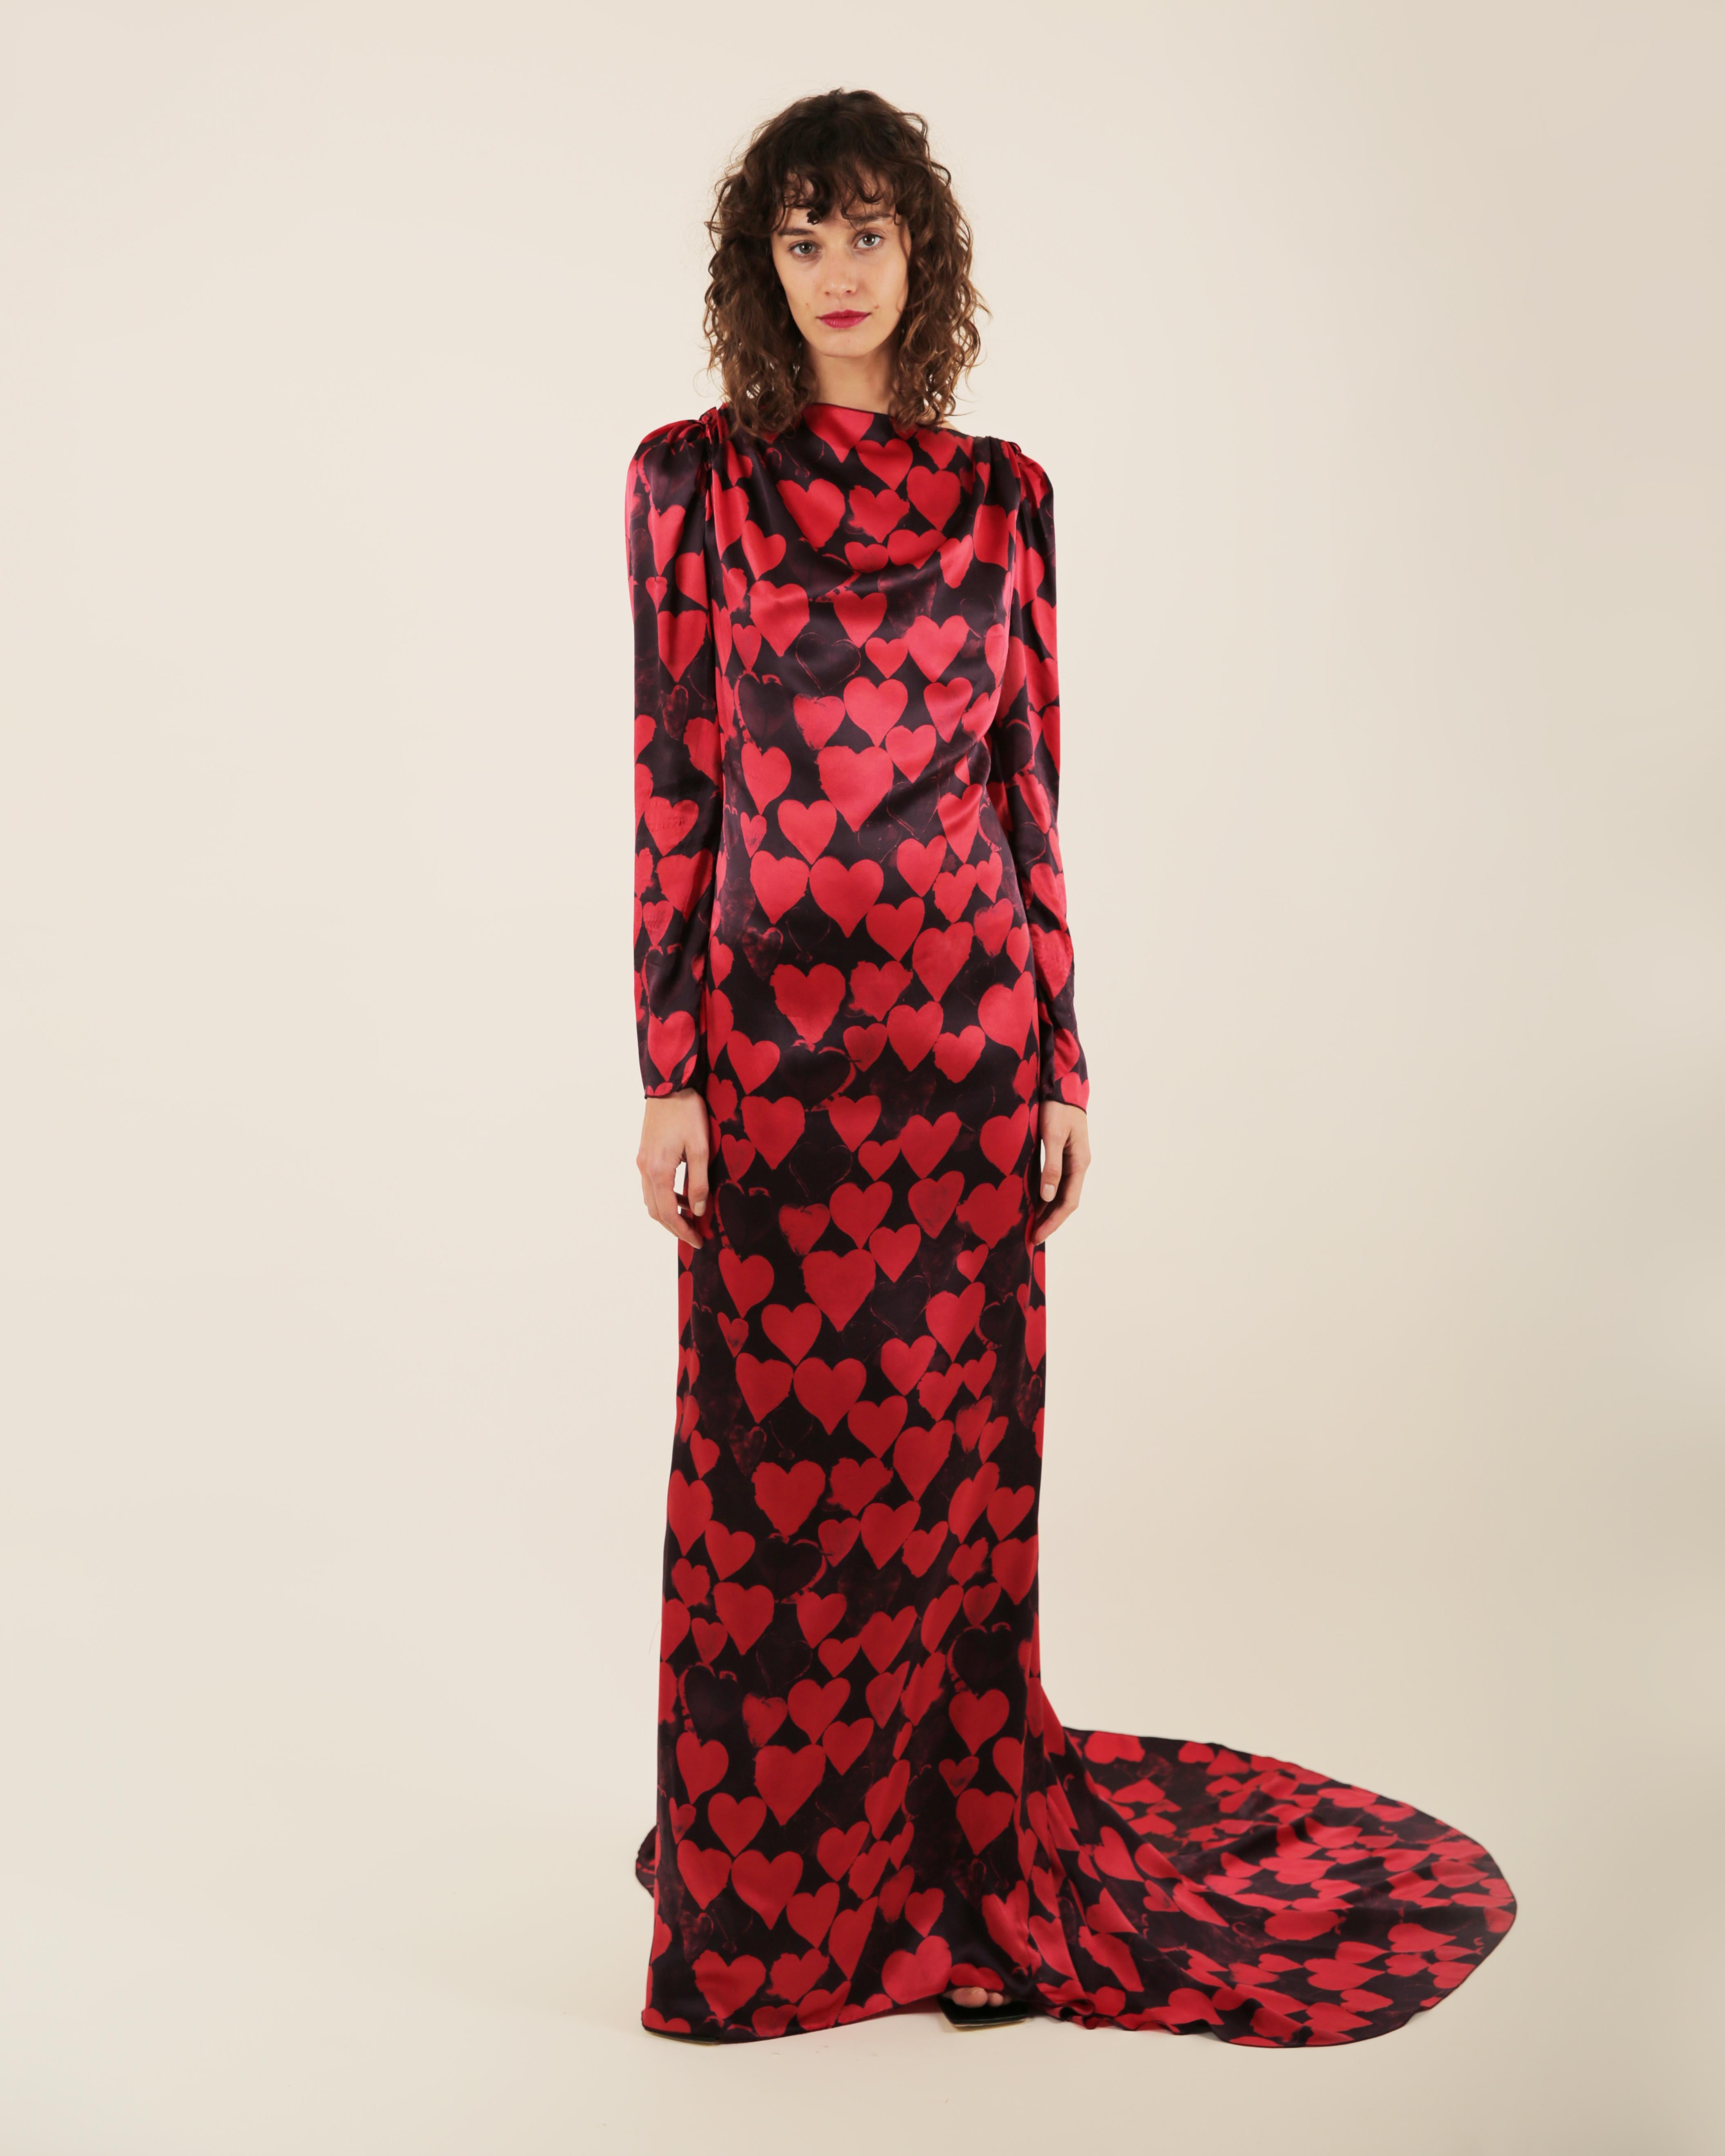 Lanvin pre/FW 2012 10 yr anniversary black red heart print silk train gown dress In Excellent Condition For Sale In Paris, FR